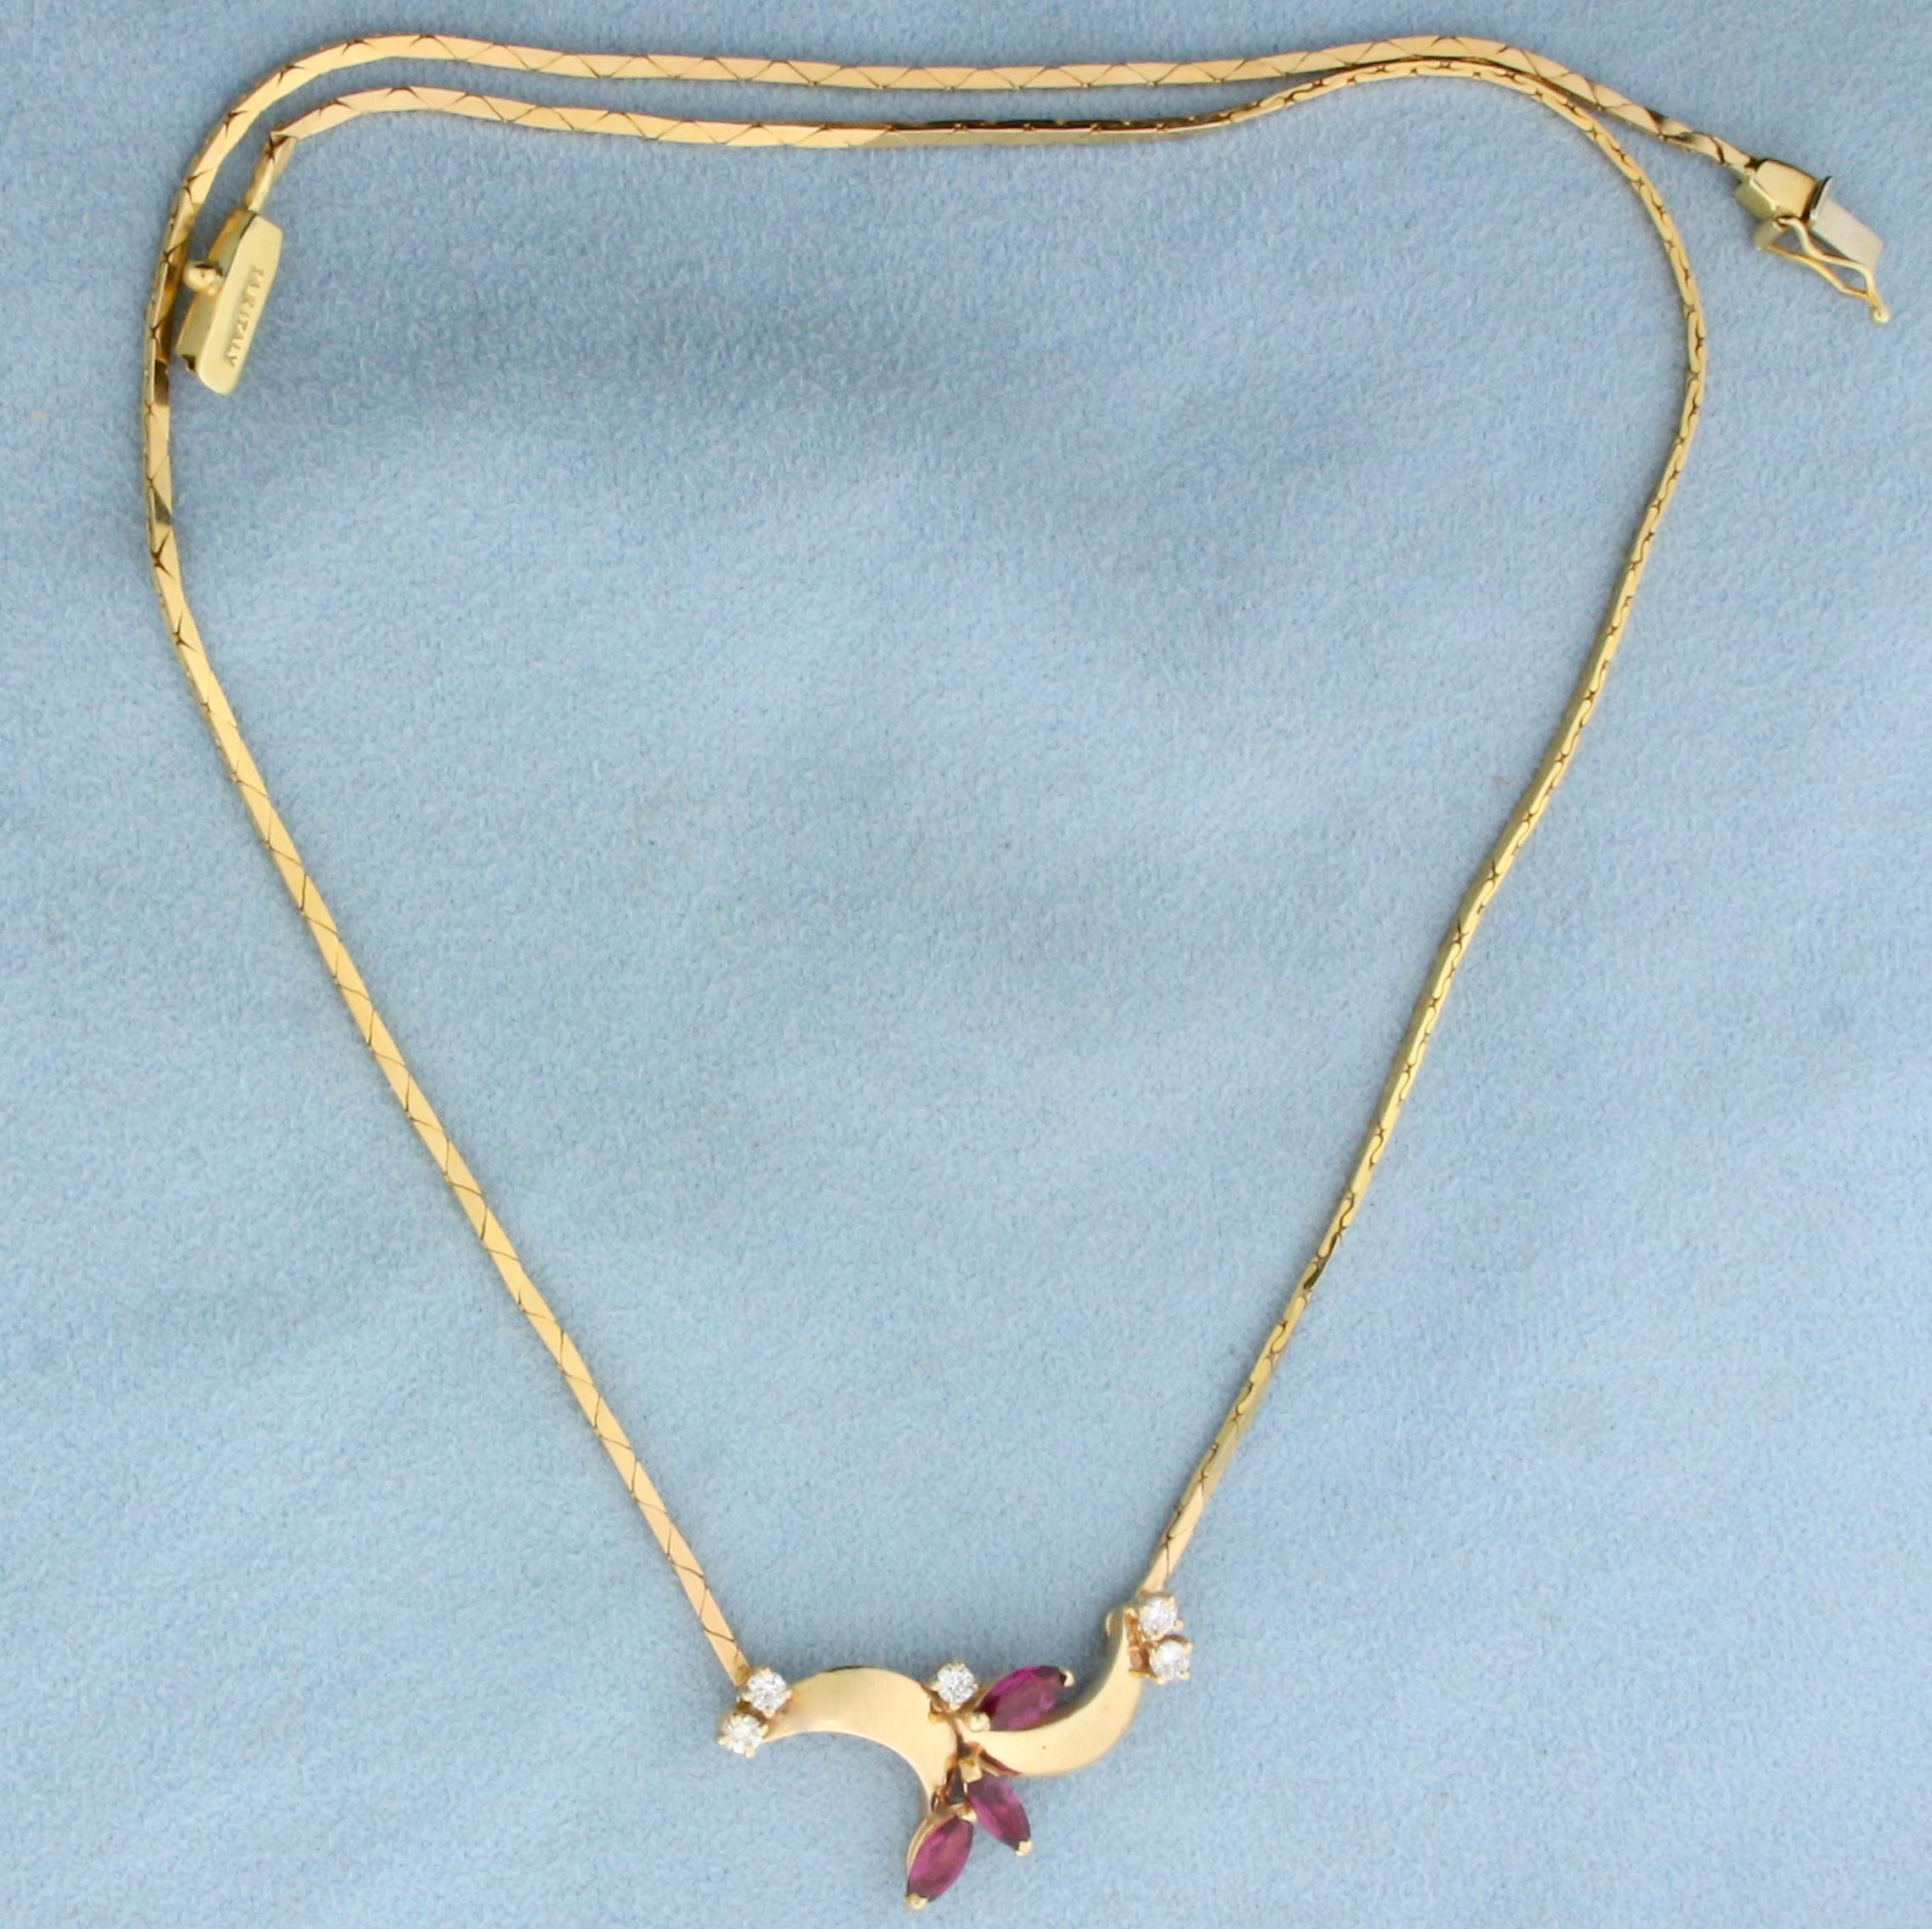 Italian Made Ruby And Diamond Necklace In 14k Yellow Gold